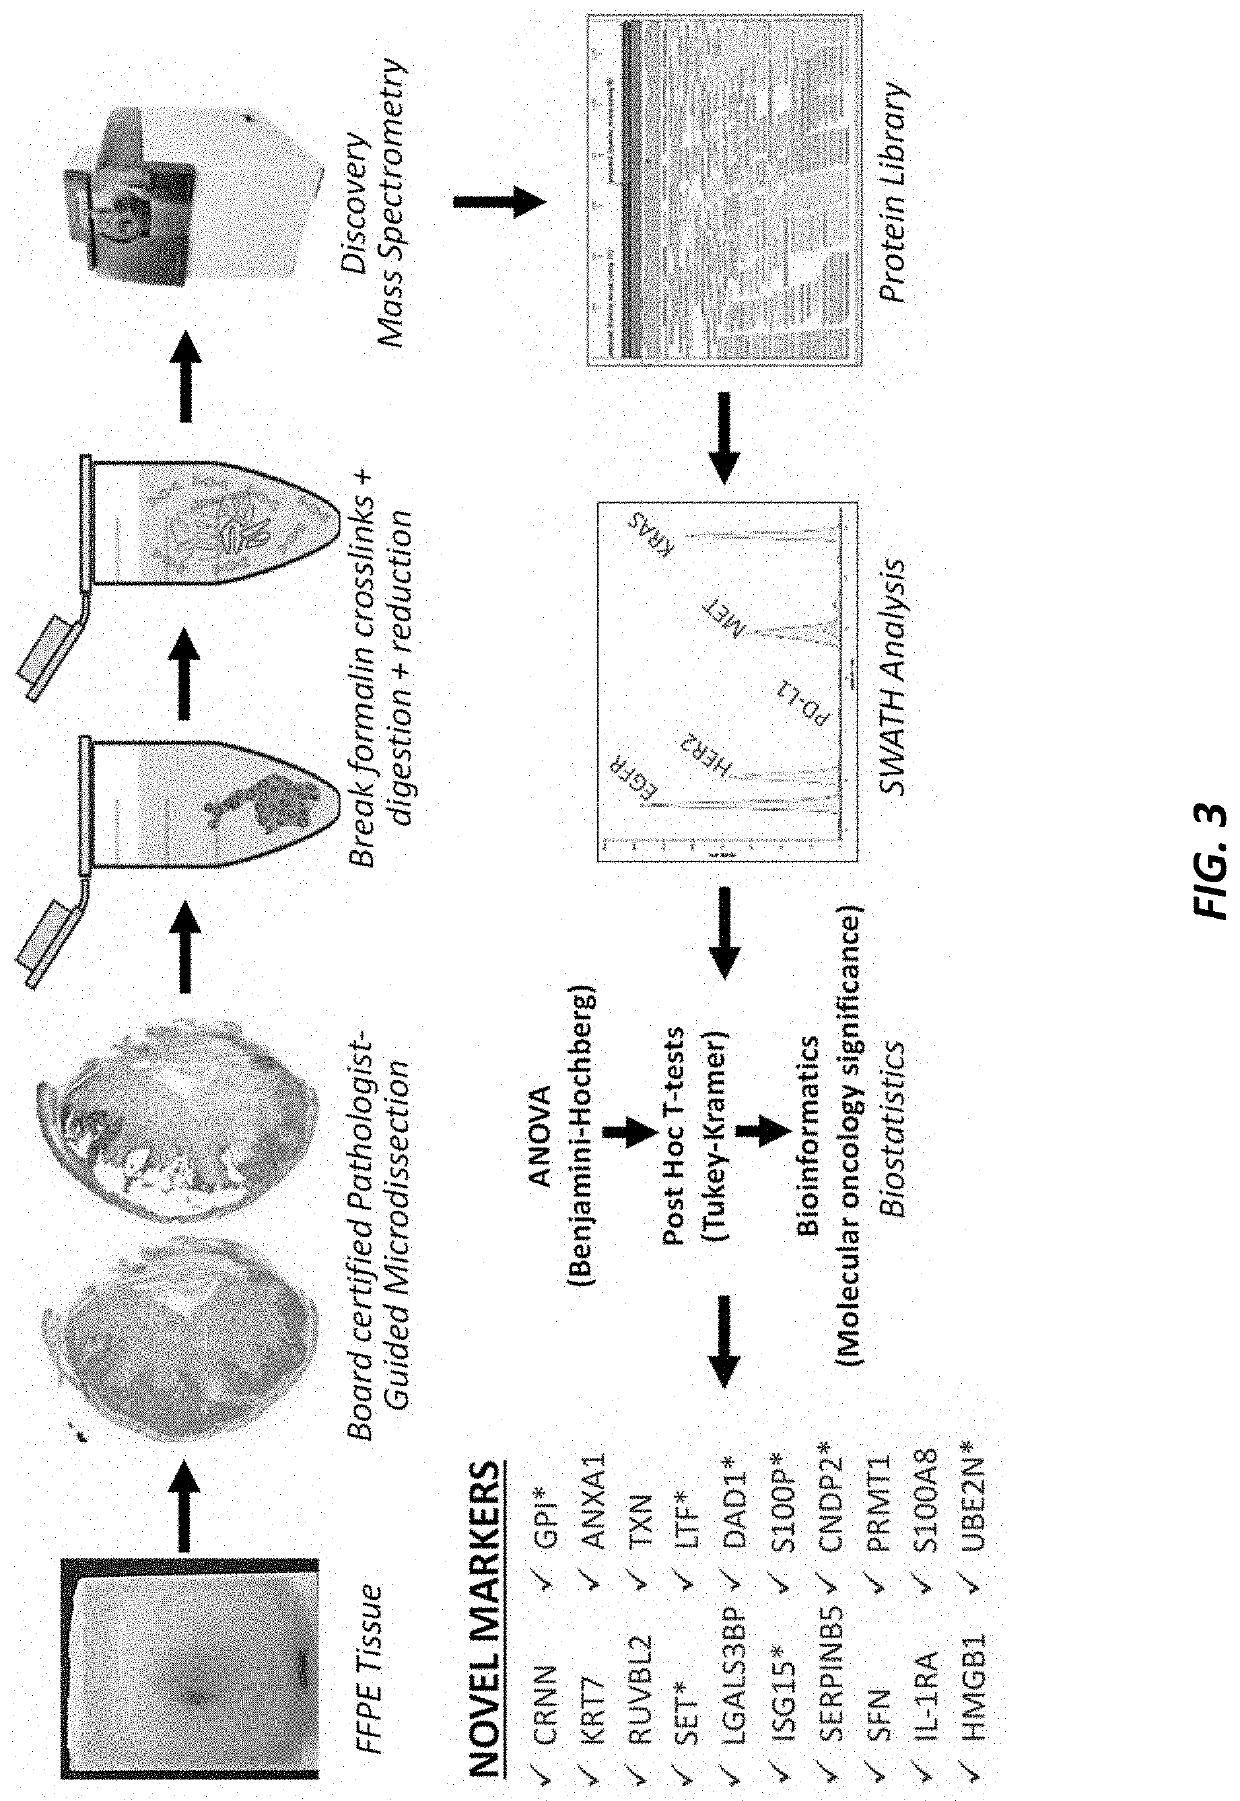 Systems and methods for barrett's esophagus pathogenesis and esophageal adenocarcinoma progression revealing markers